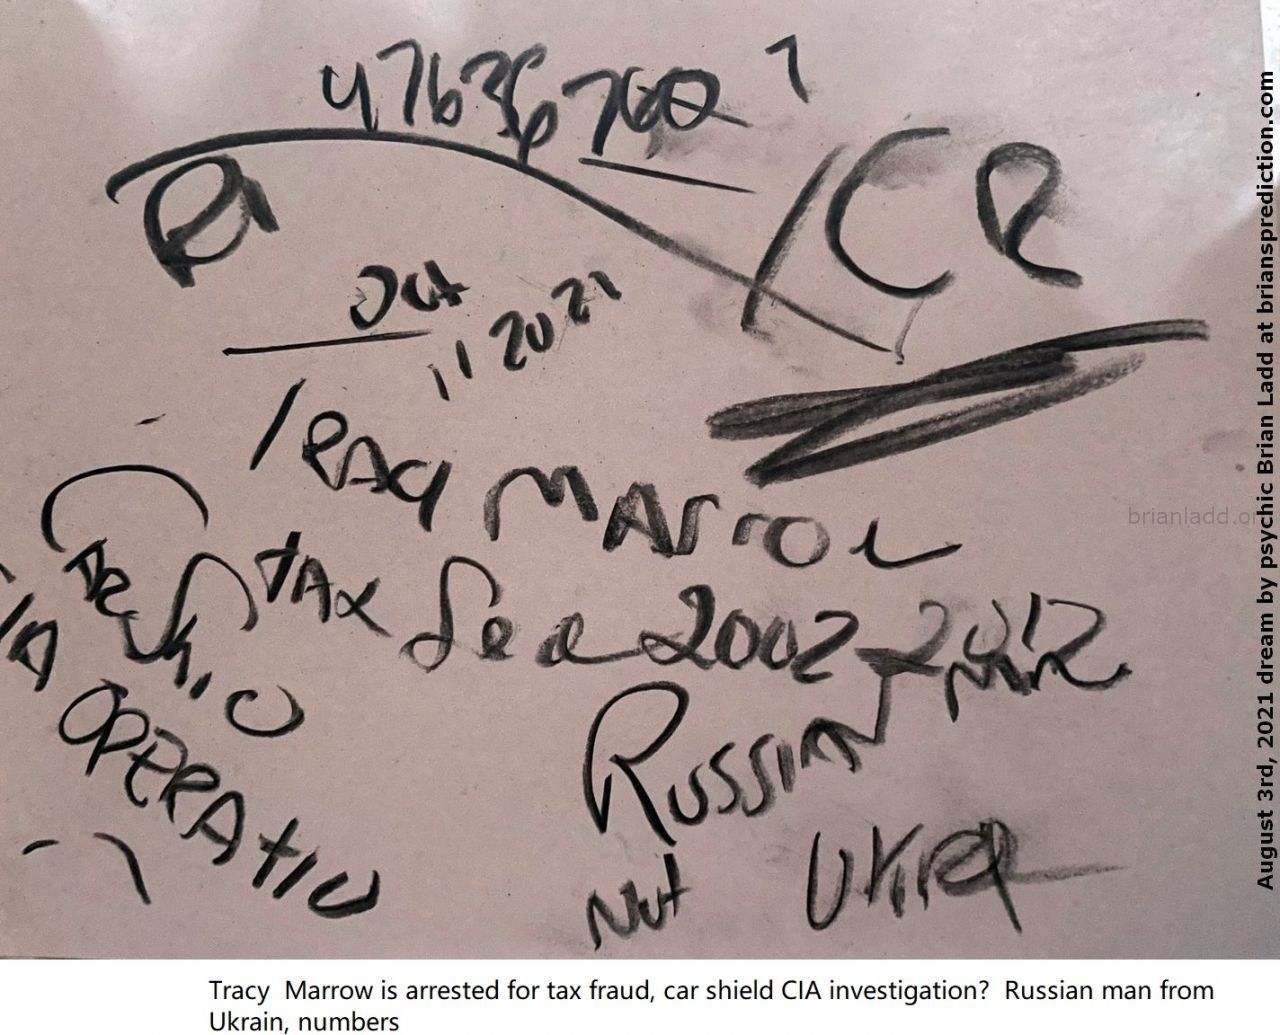 3 August 2021 2 Tracy  Marrow is arrested for tax fraud, car shield CIA investigation?  Russian man from Ukraine, numbers...
Tracy  Marrow is arrested for tax fraud, car shield CIA investigation?  Russian man from Ukraine, numbers
